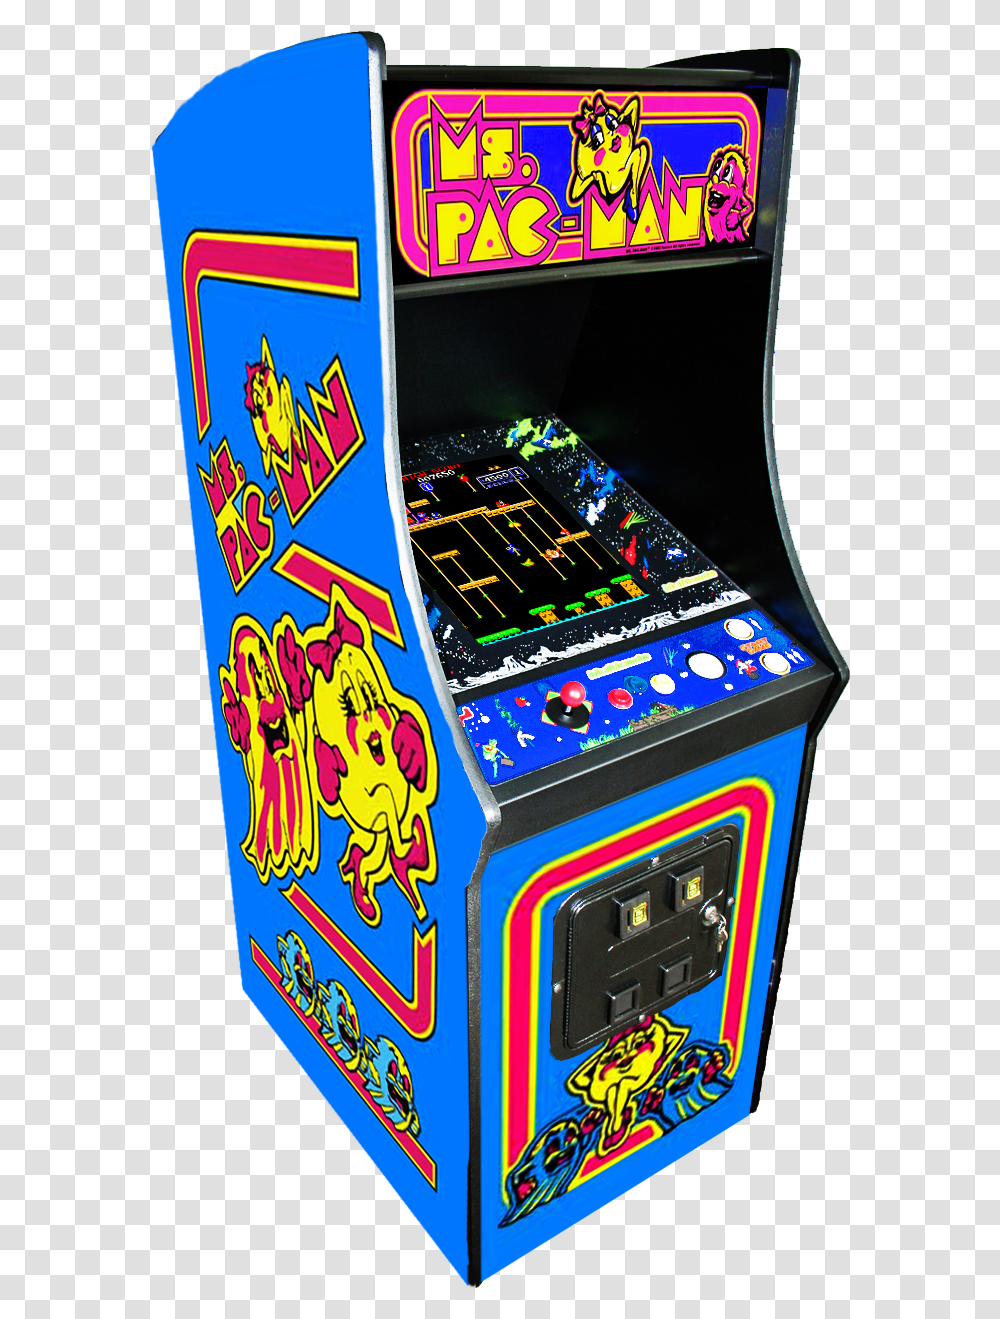 Board Games Vs Video Arcade Game Machines Retro Ms Pacman Arcade Machine Build, Mobile Phone, Electronics, Cell Phone, Pac Man Transparent Png